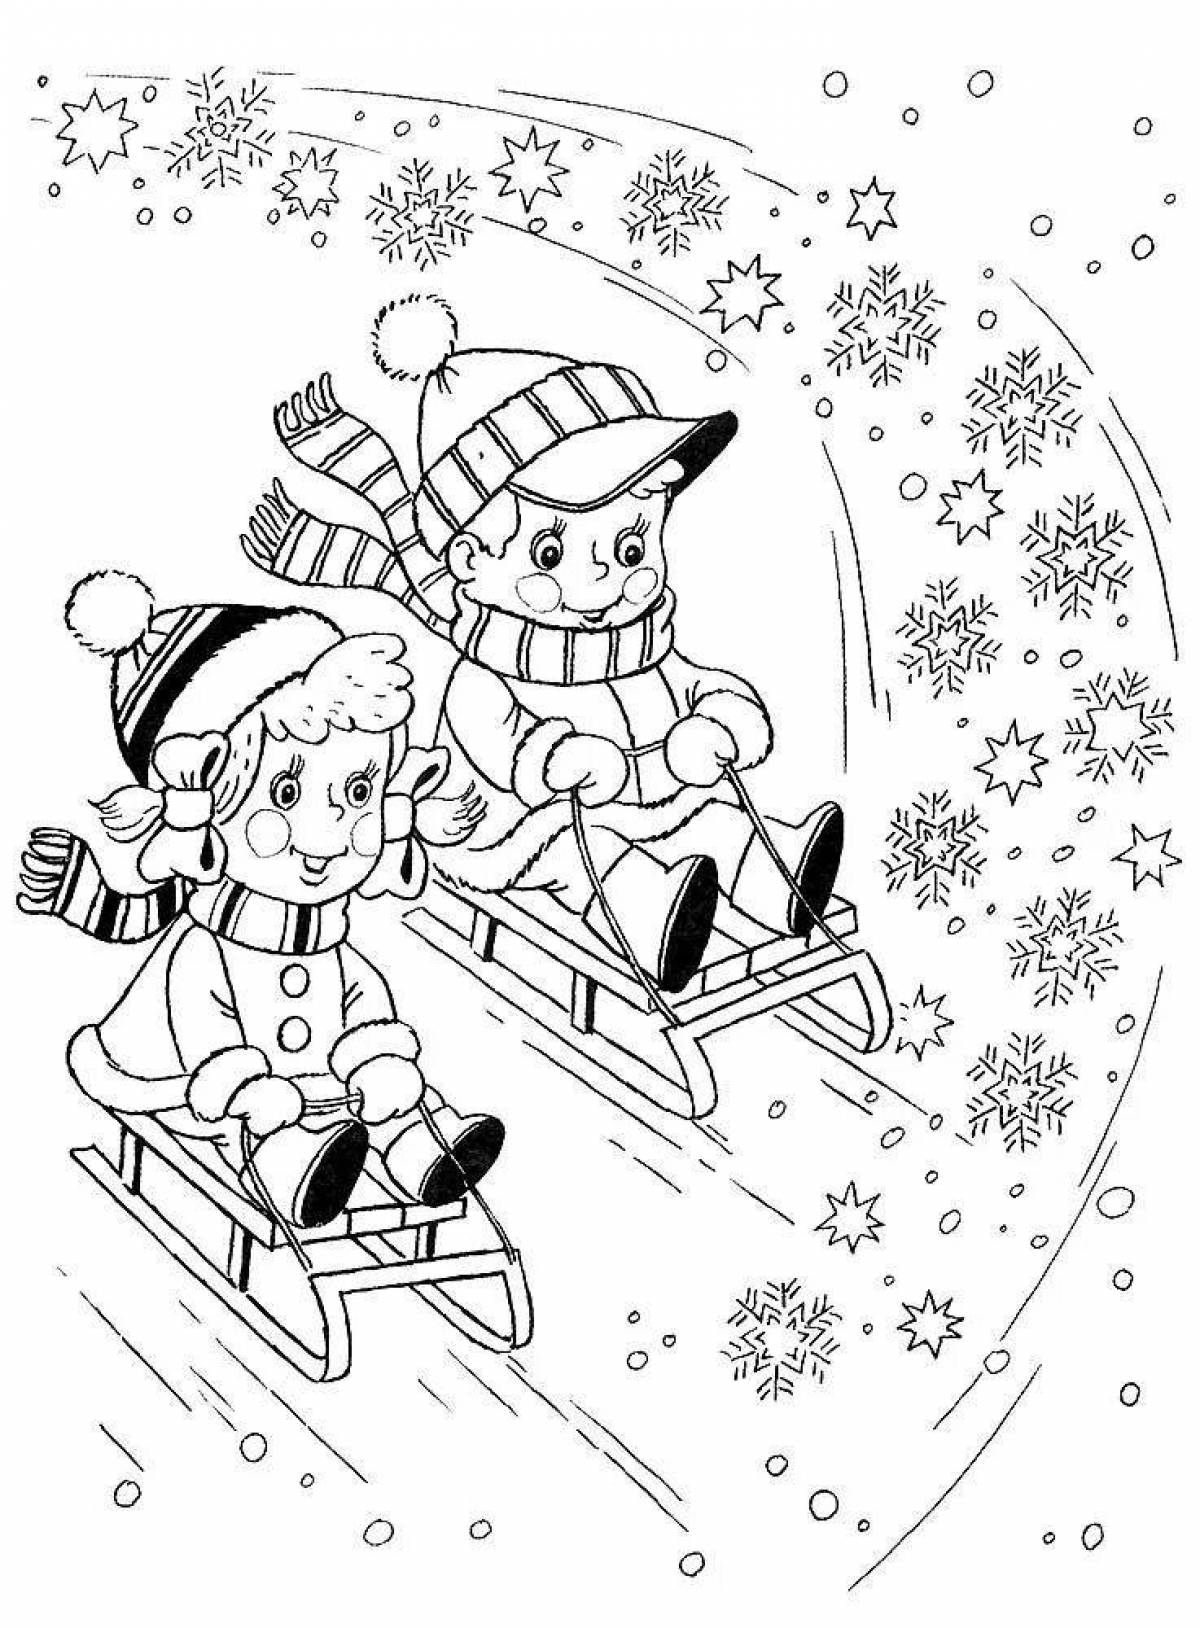 Colorful sledding coloring page